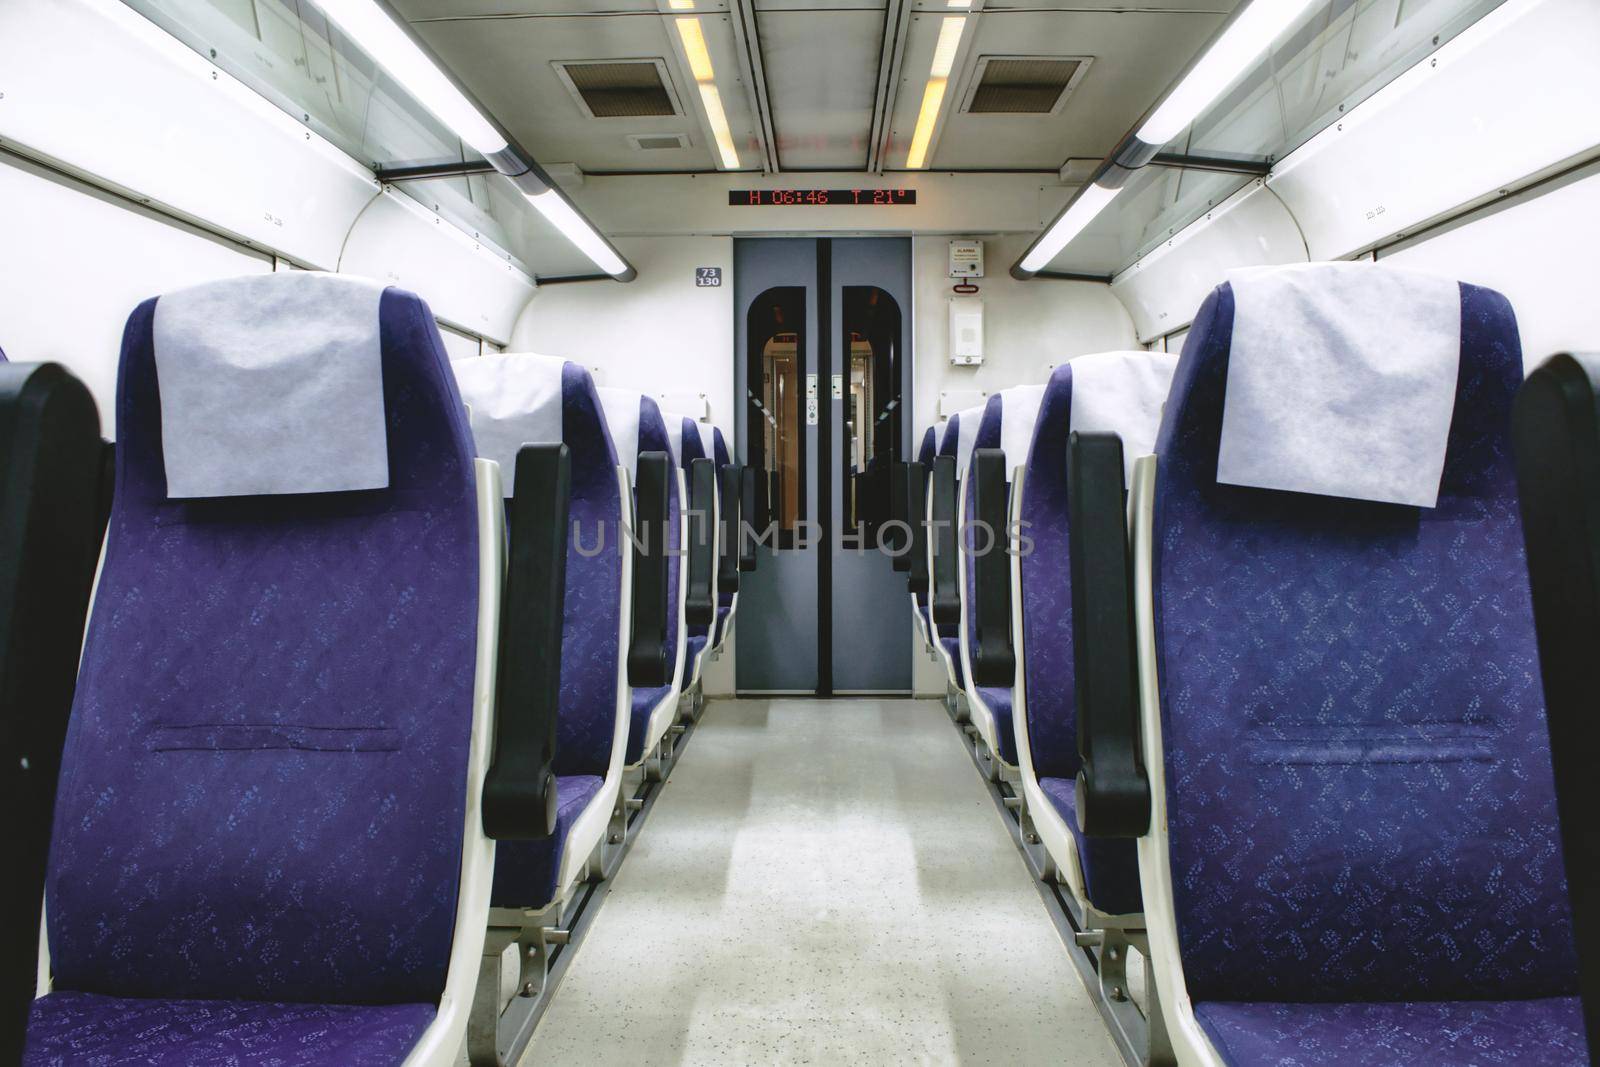 Interior of train carriage between rows of empty chairs